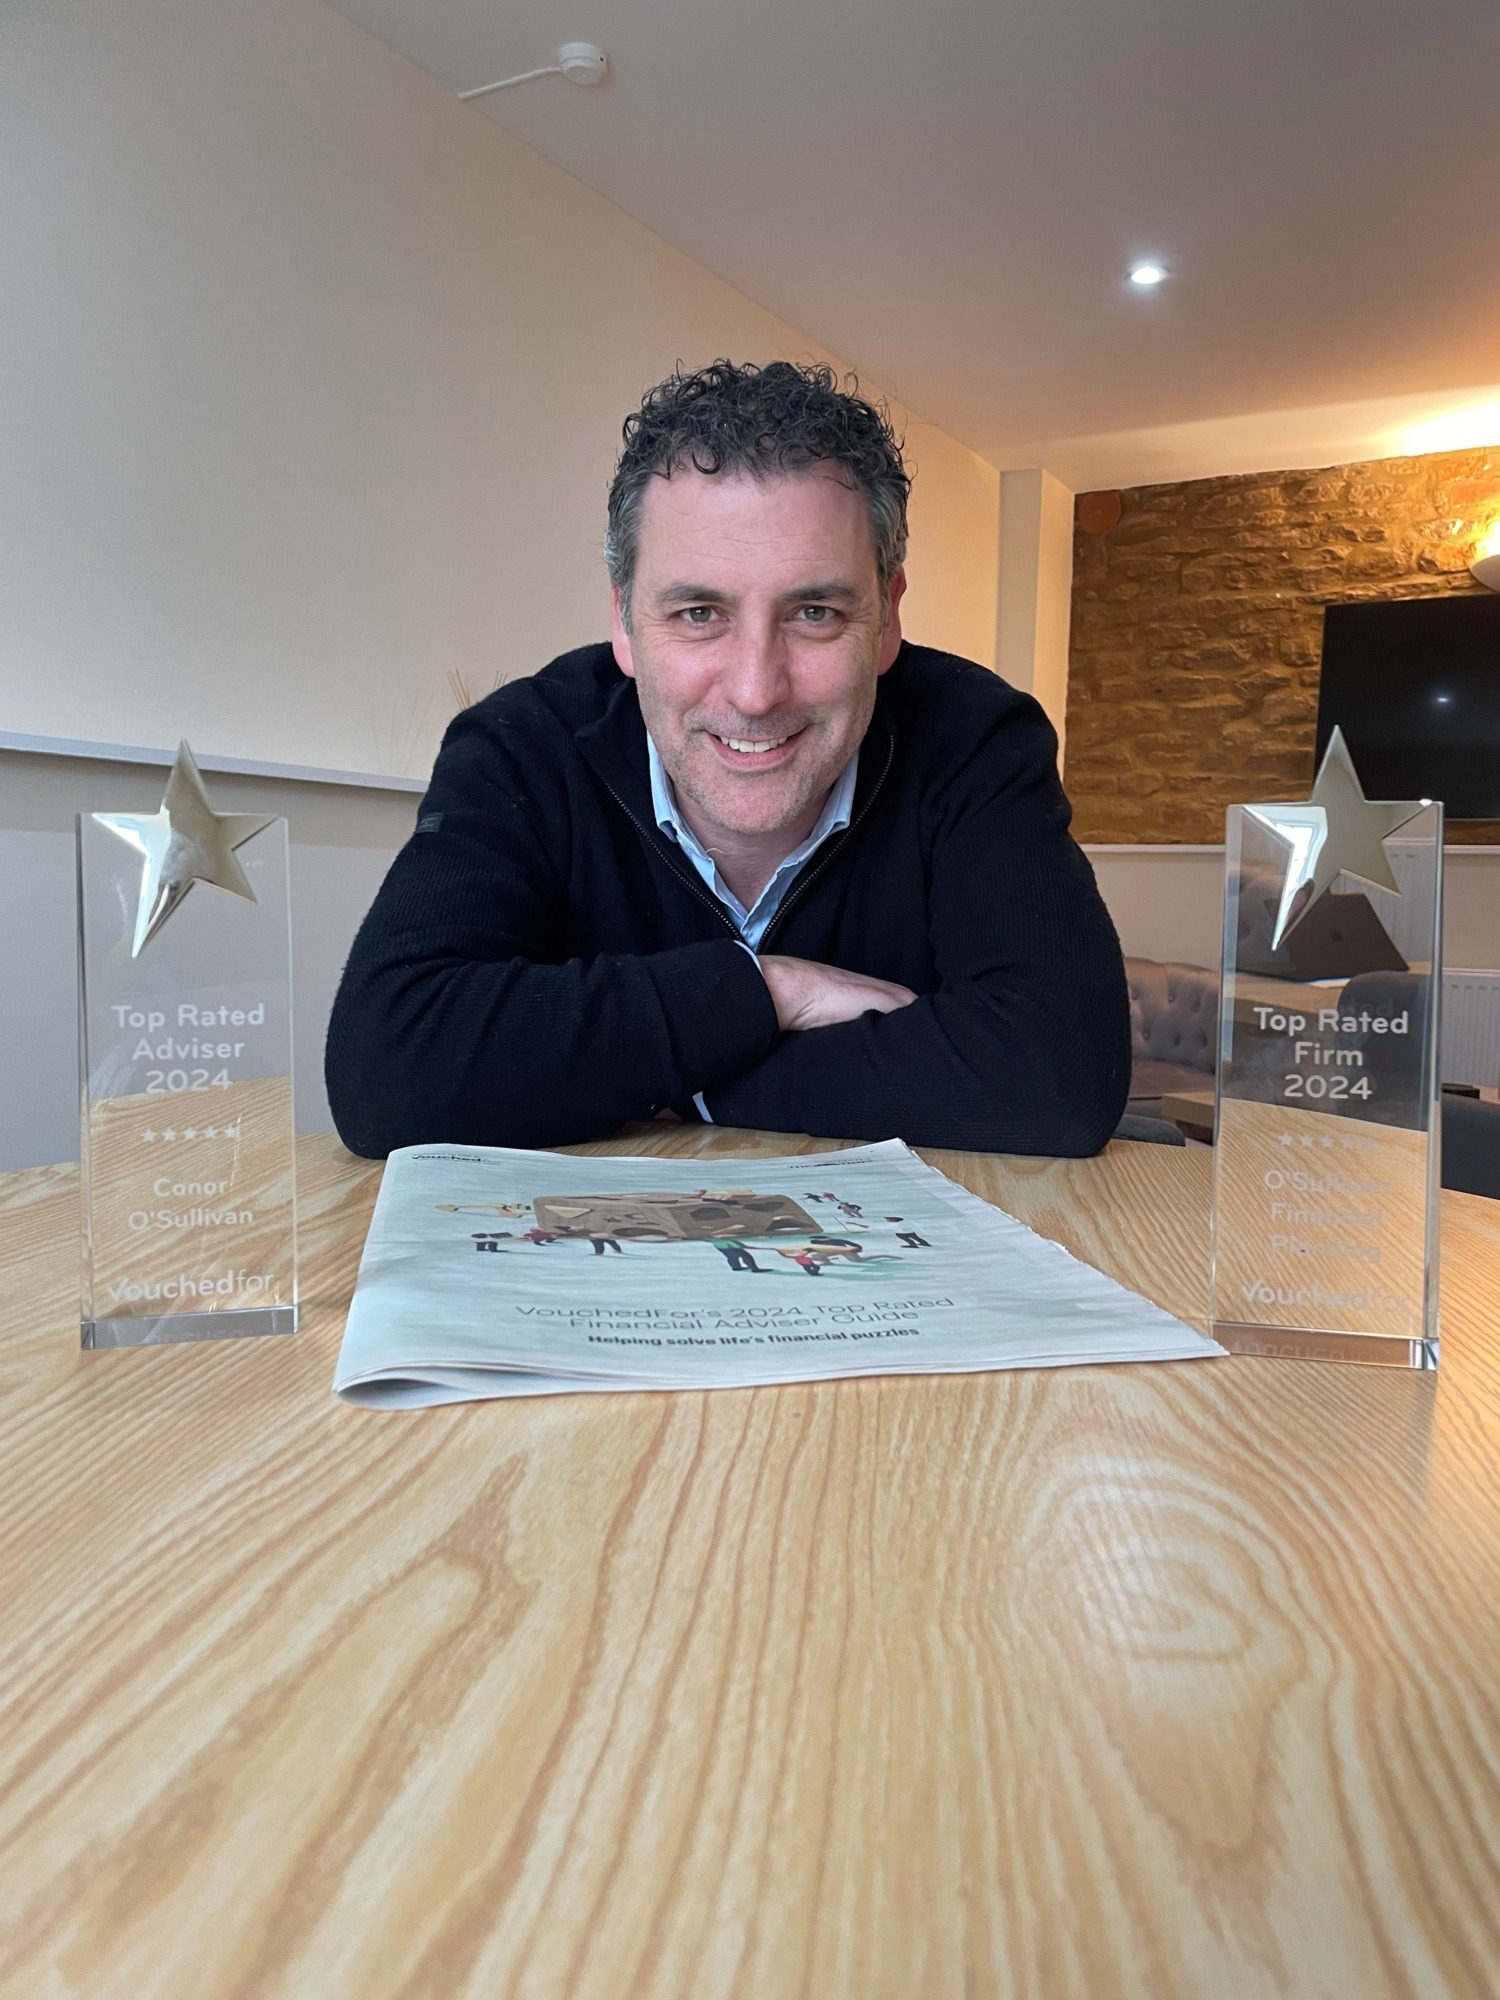 Conor O'Sullivan scoops Top Rated accolade for third time